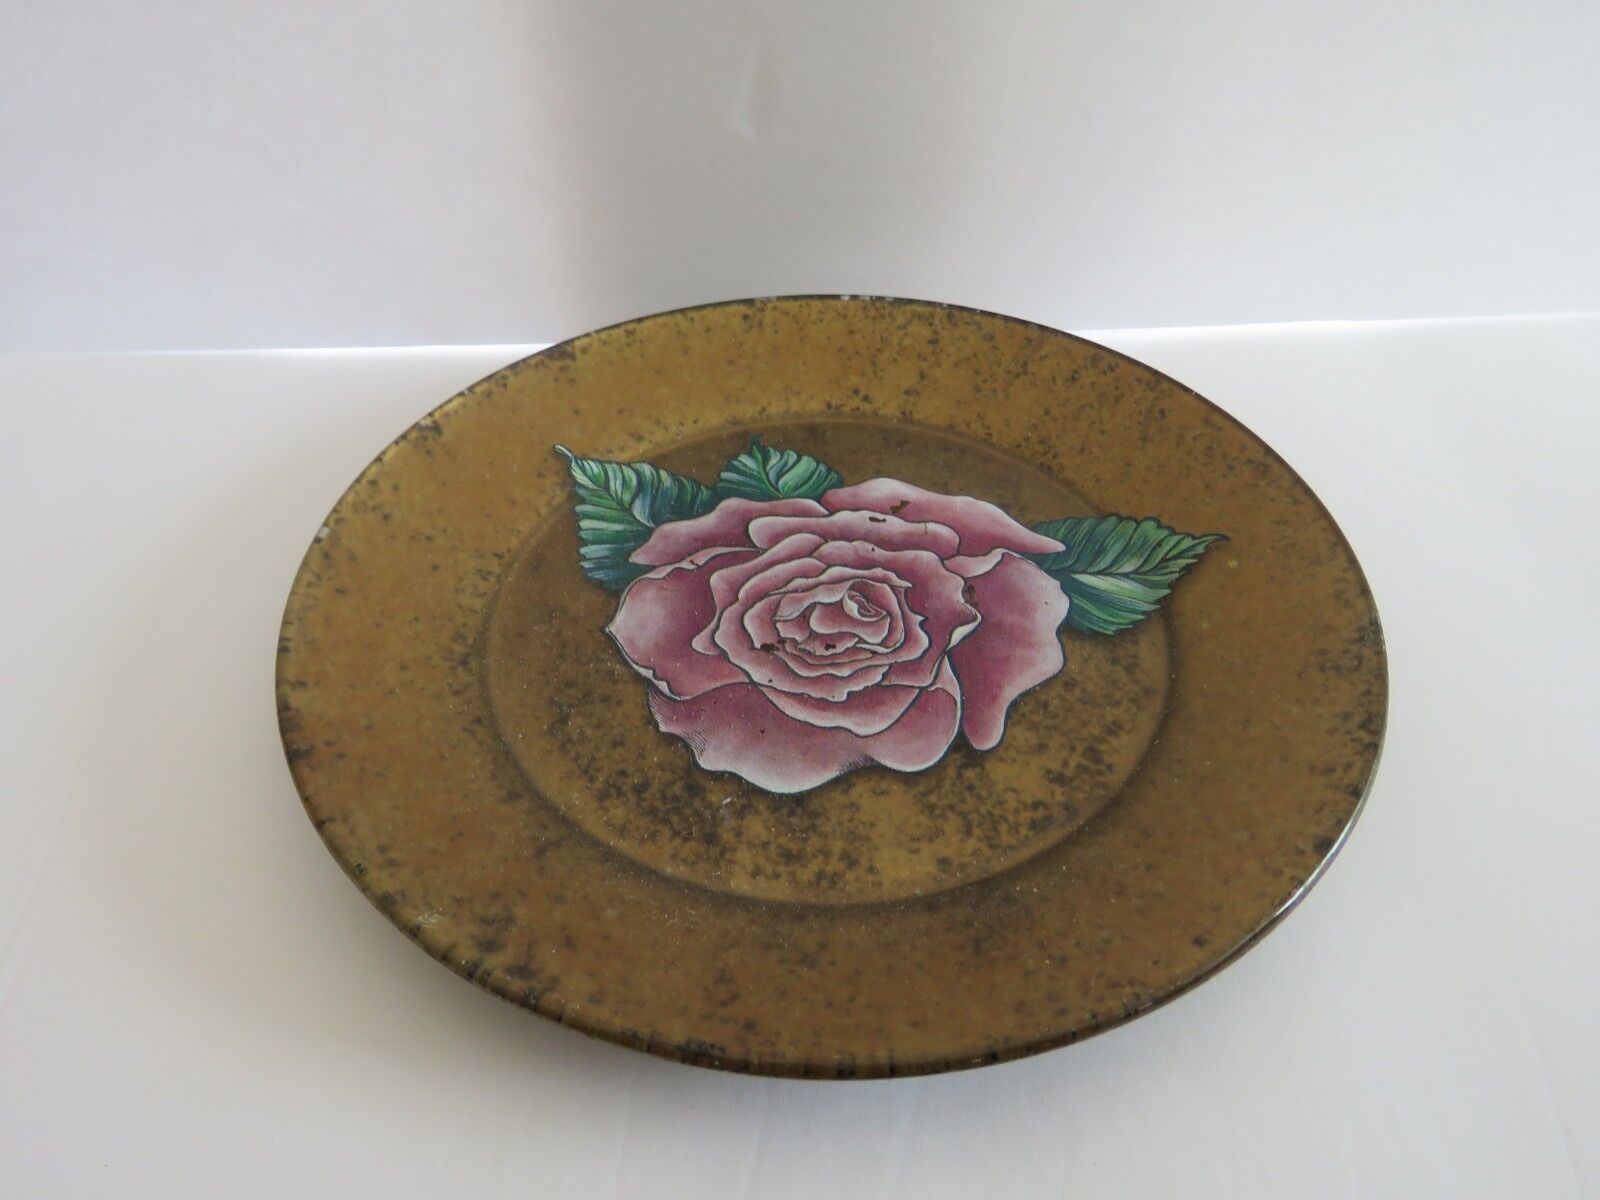 COLLECTIBLE - VINTAGE PLATE WITH ROSE